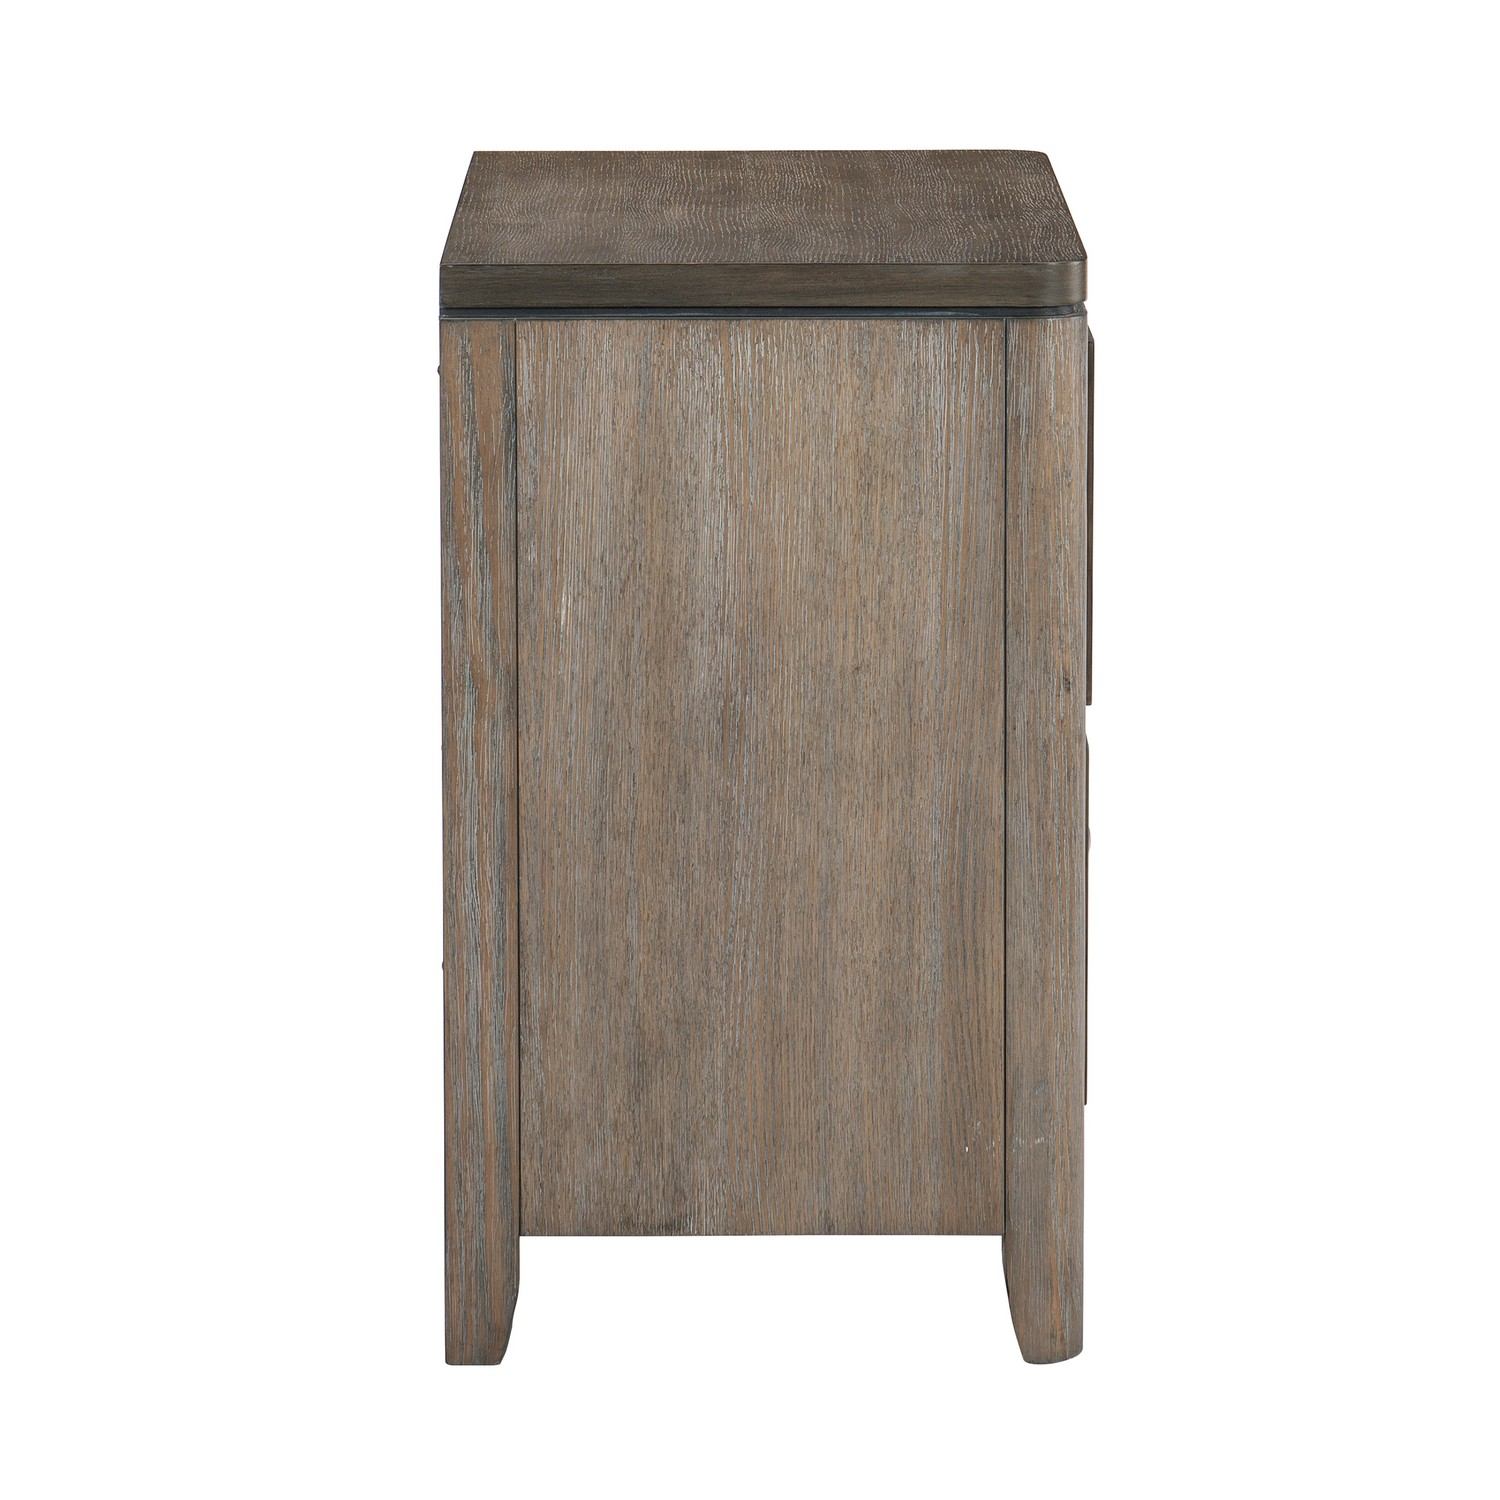 Homelegance Newell Night Stand - Two-tone finish: Brown and Gray